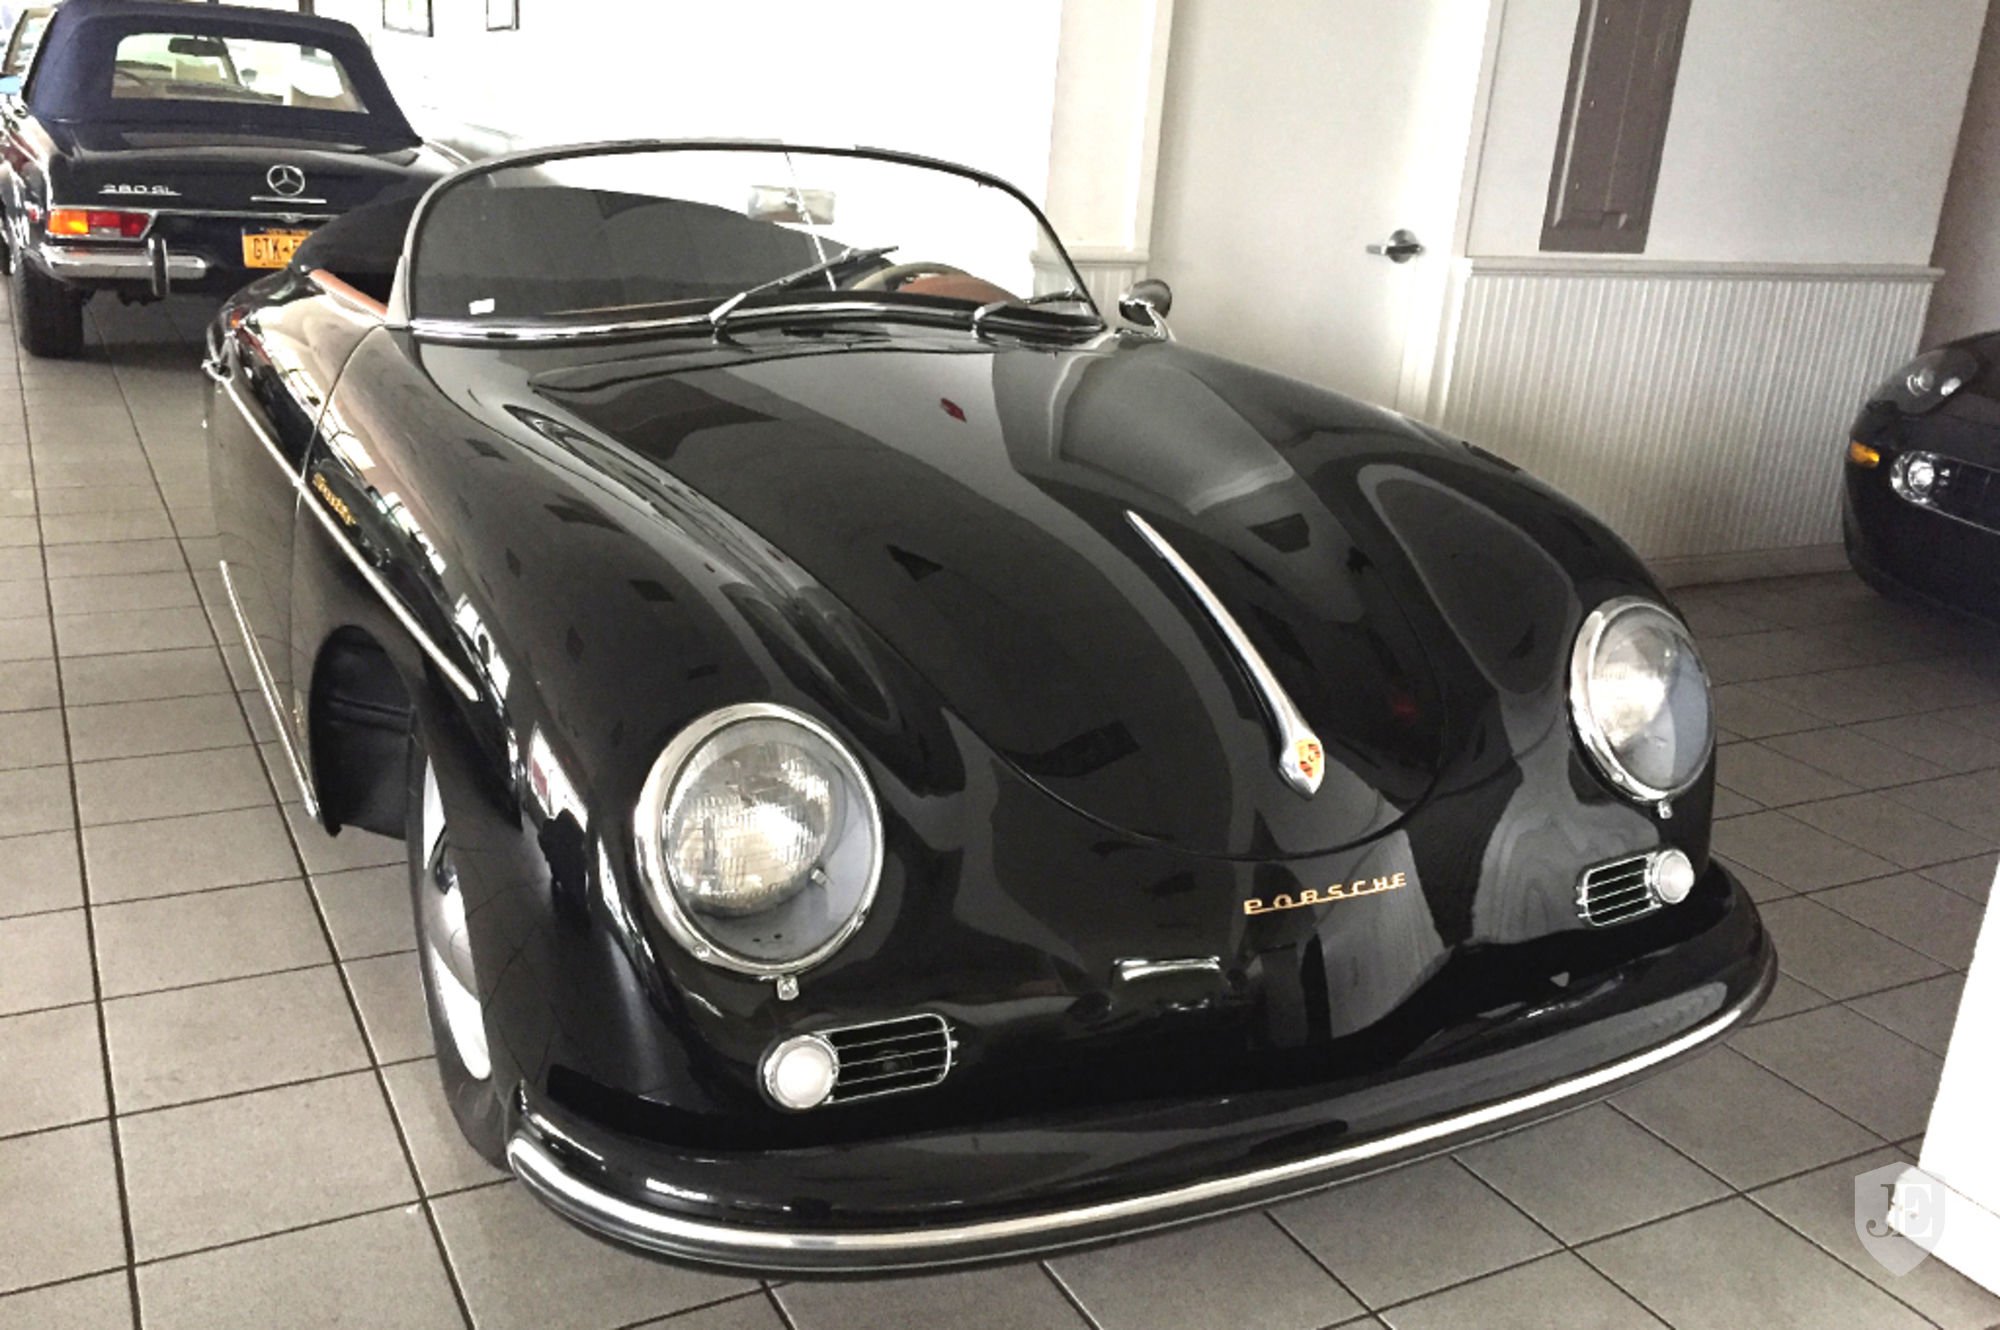 1956 Porsche 356 in United States for sale on JamesEdition